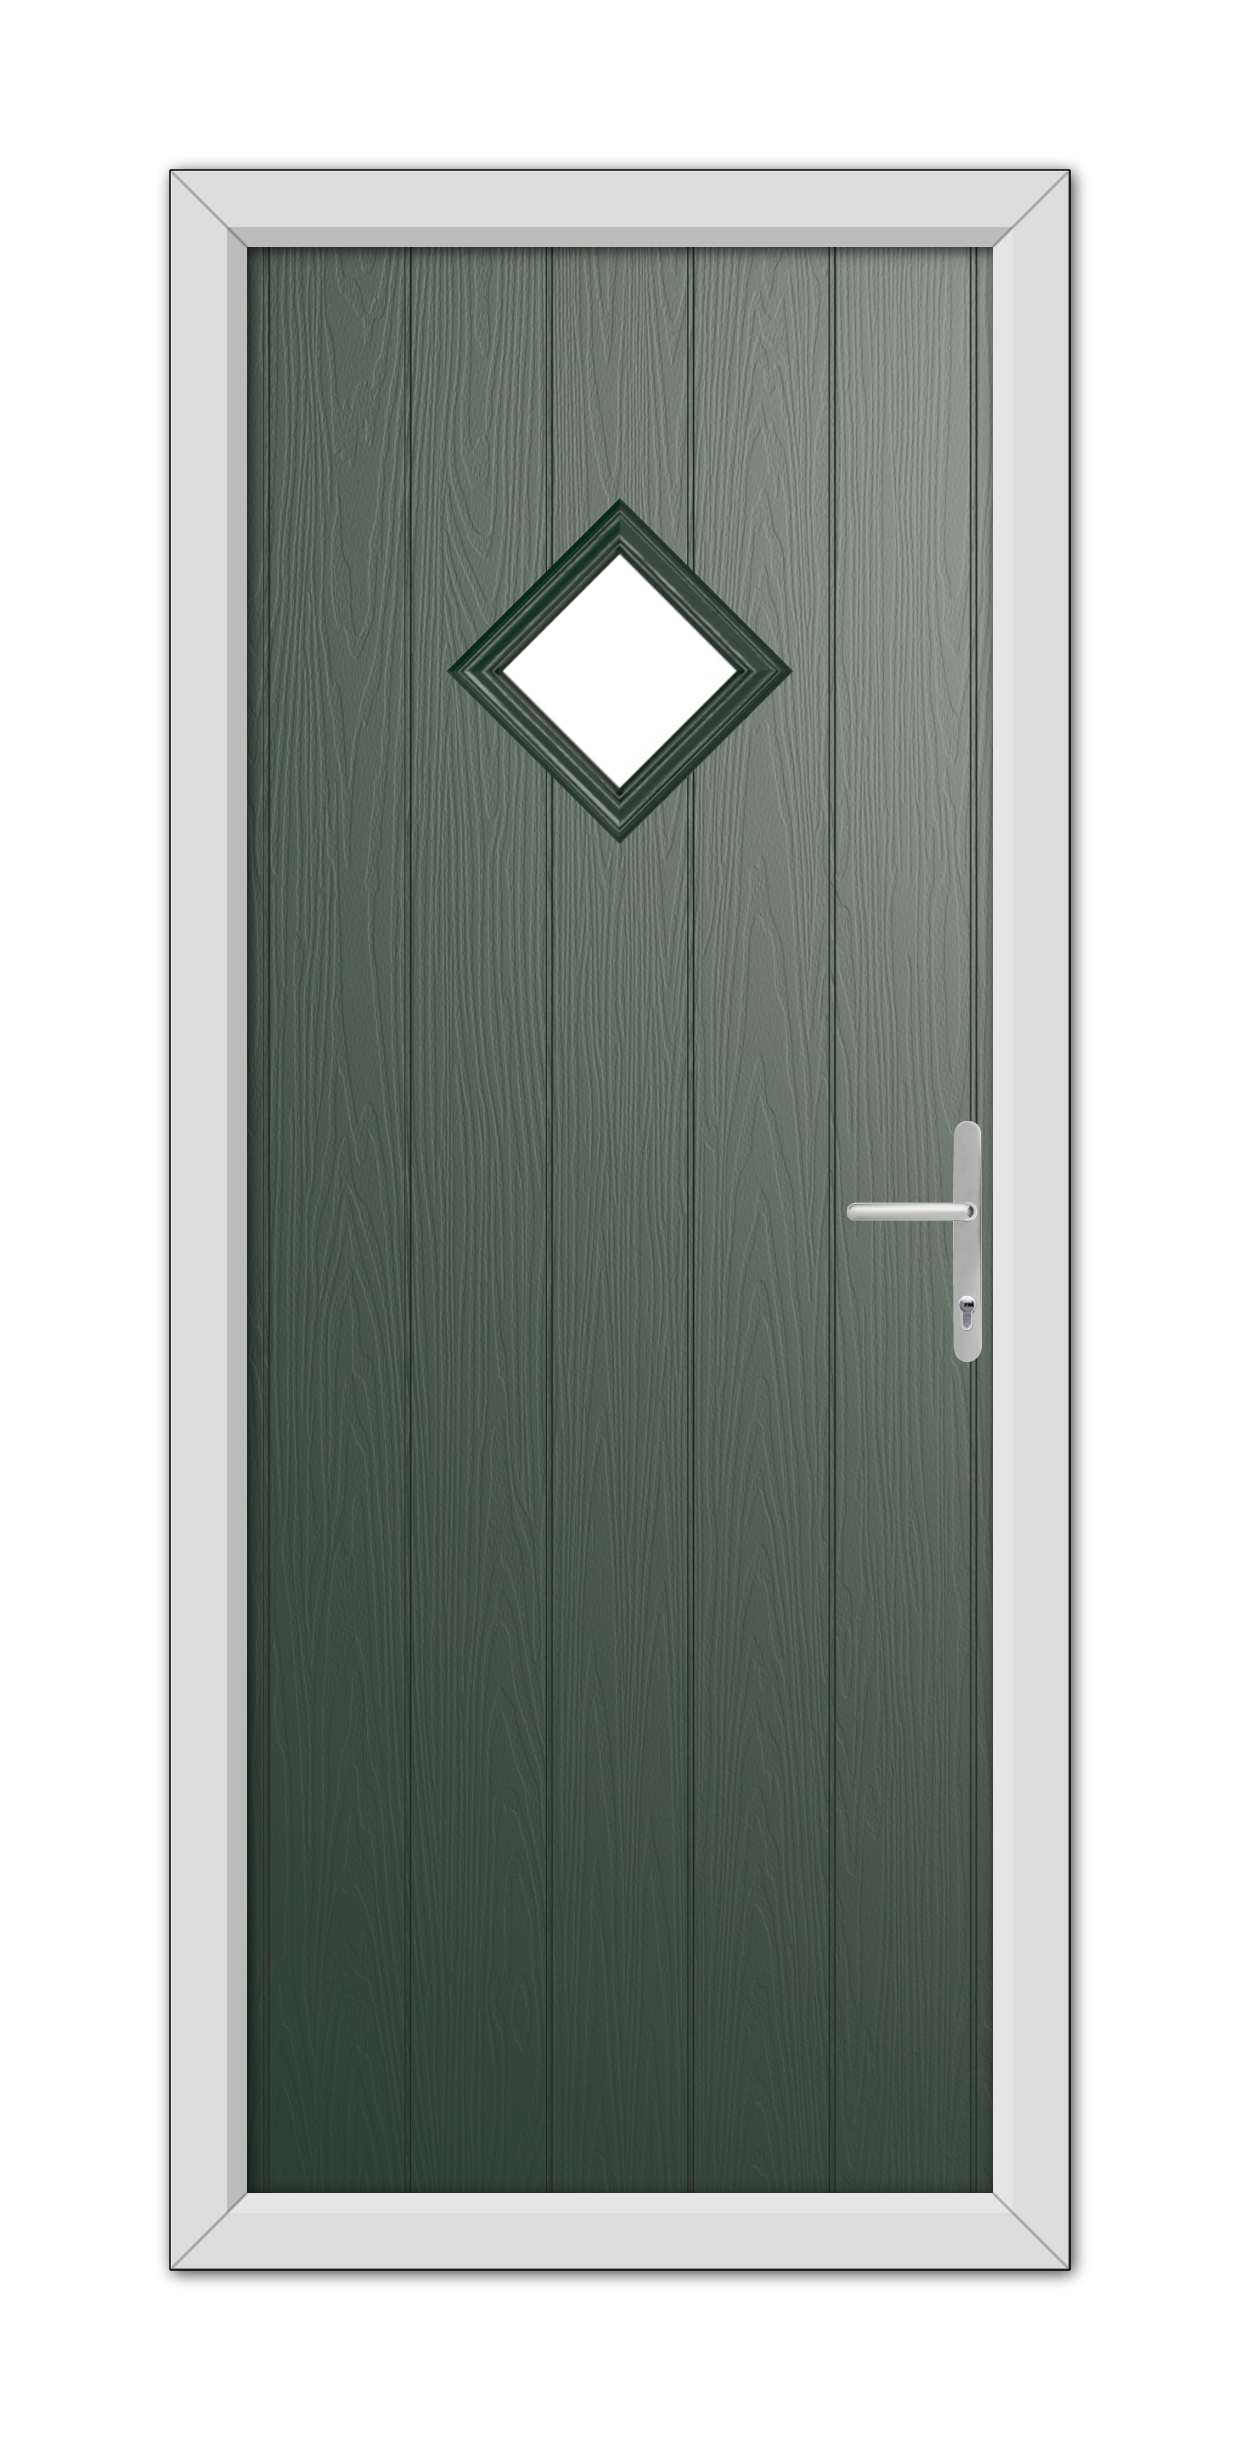 A Green Cornwall Composite Door 48mm Timber Core with a diamond-shaped window and a white handle, set within a white frame.